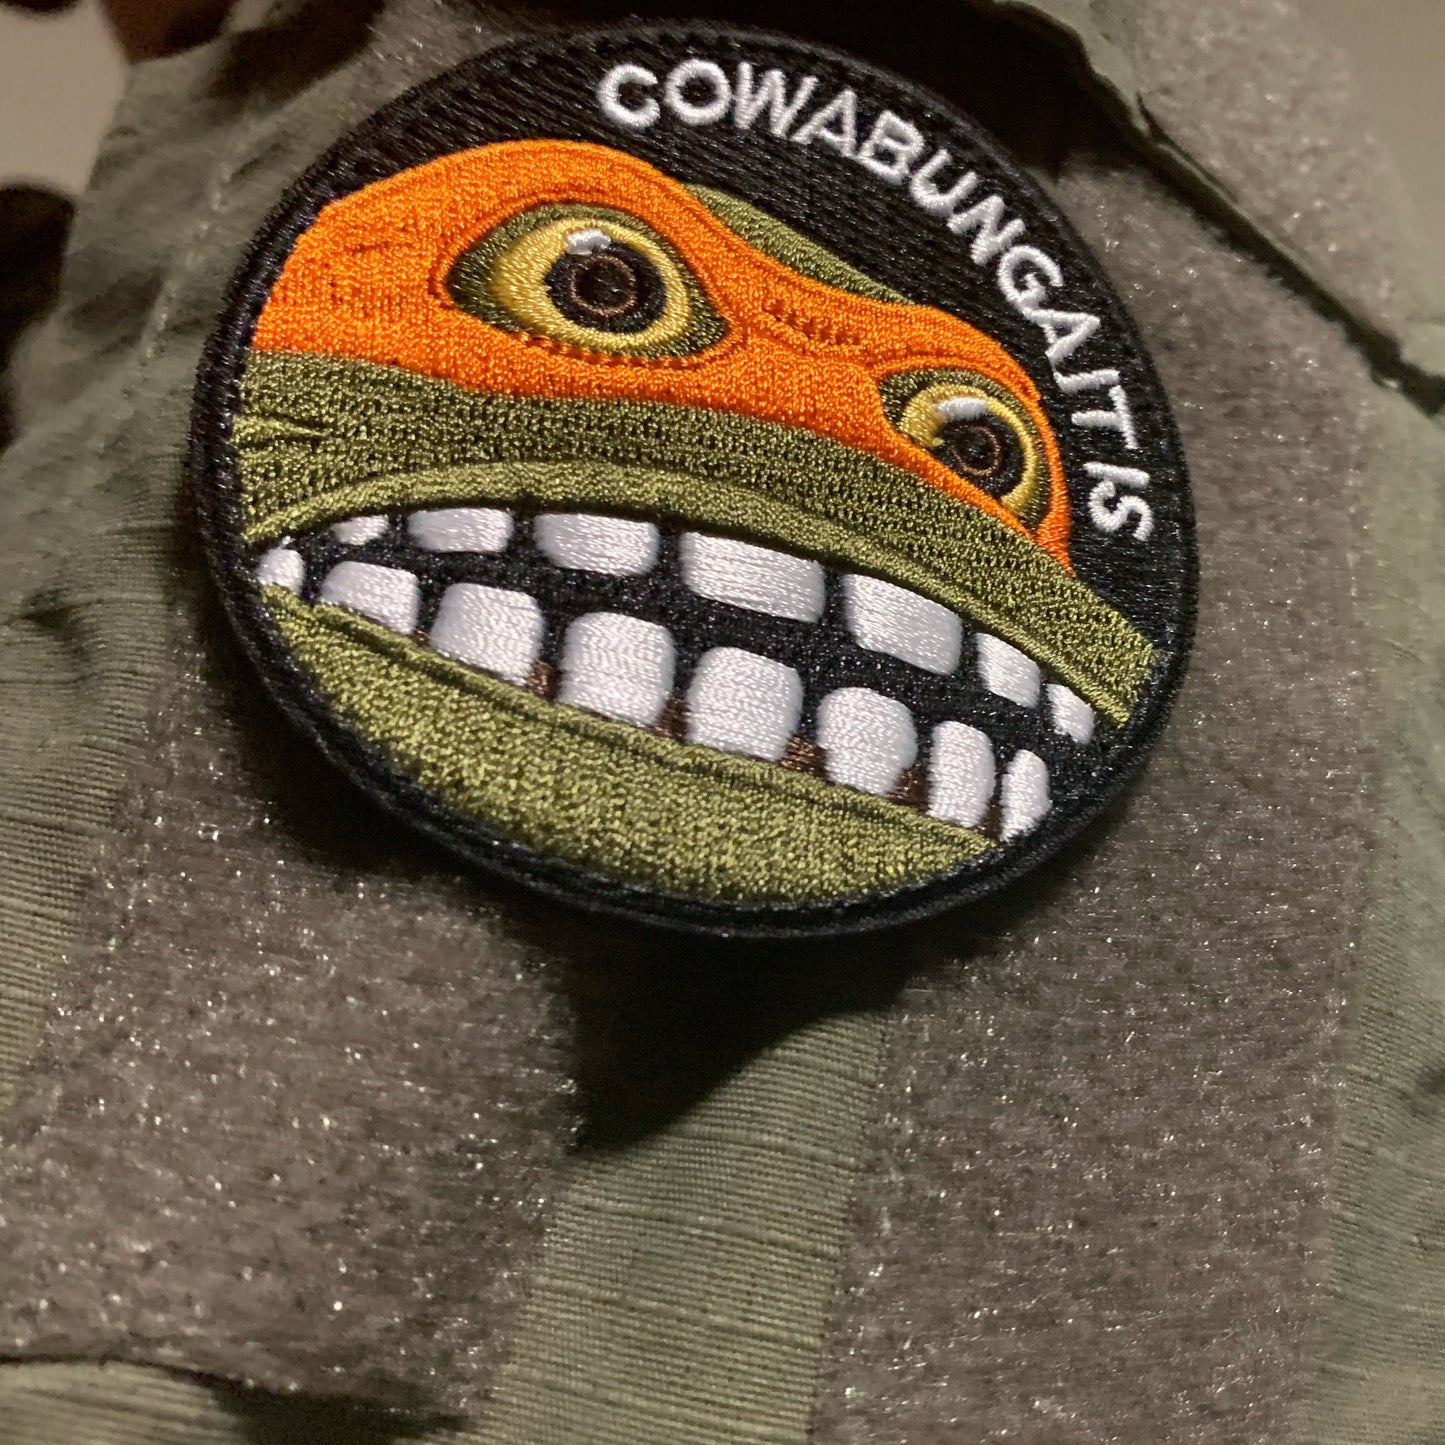 Cowabunga It Is Airsoft Patch